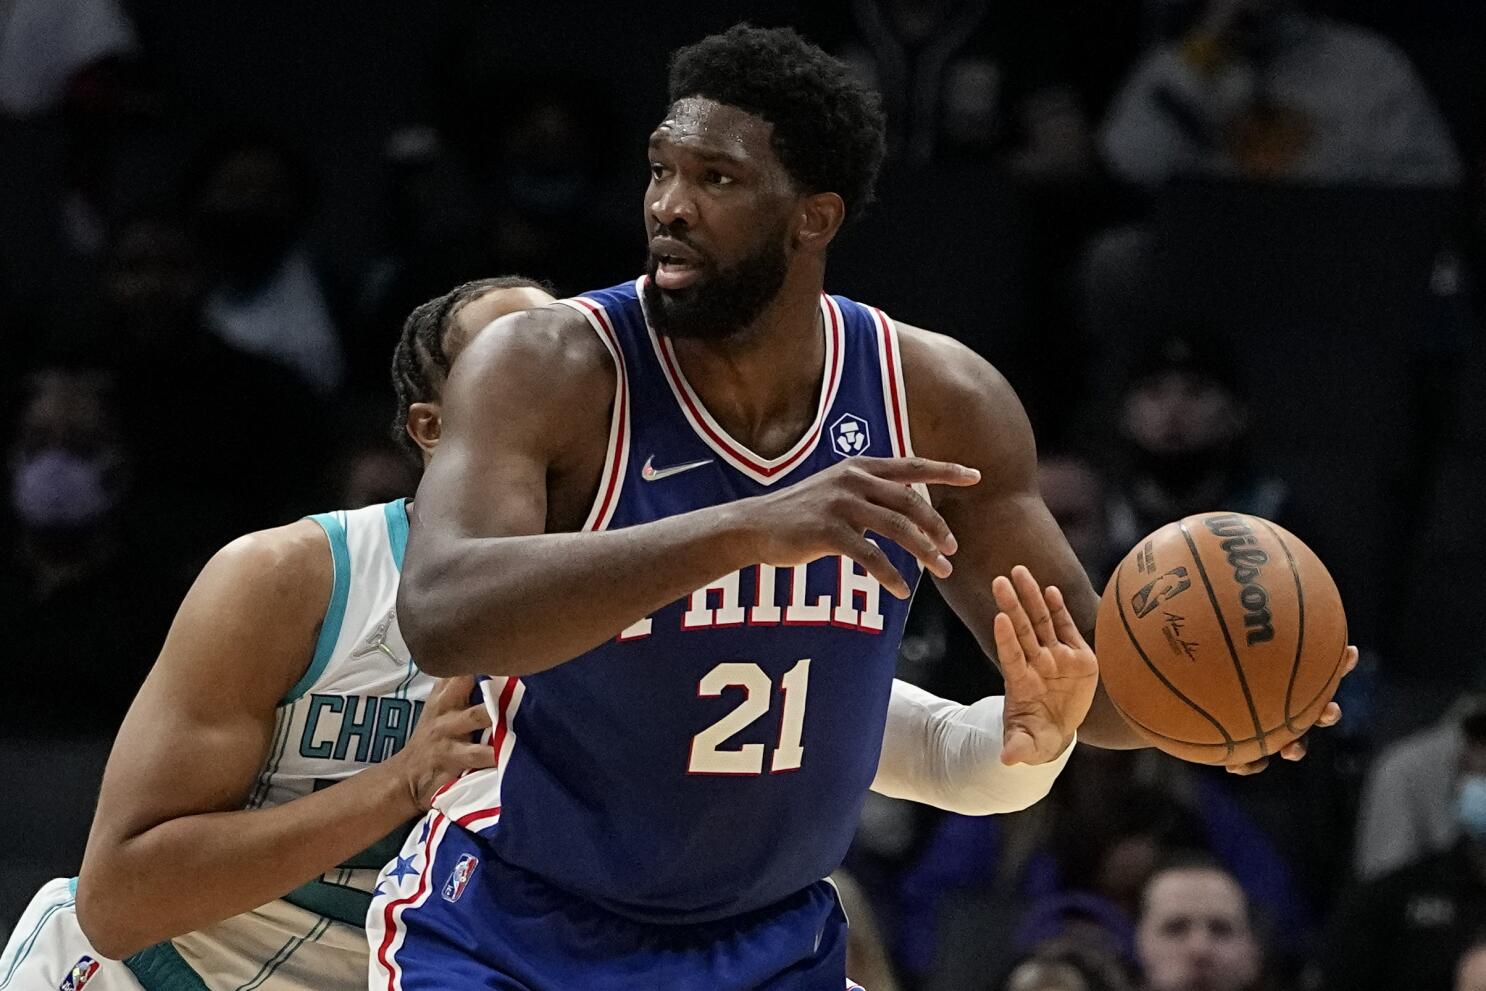 Observations from the Hornets' Overtime Loss to the Pistons